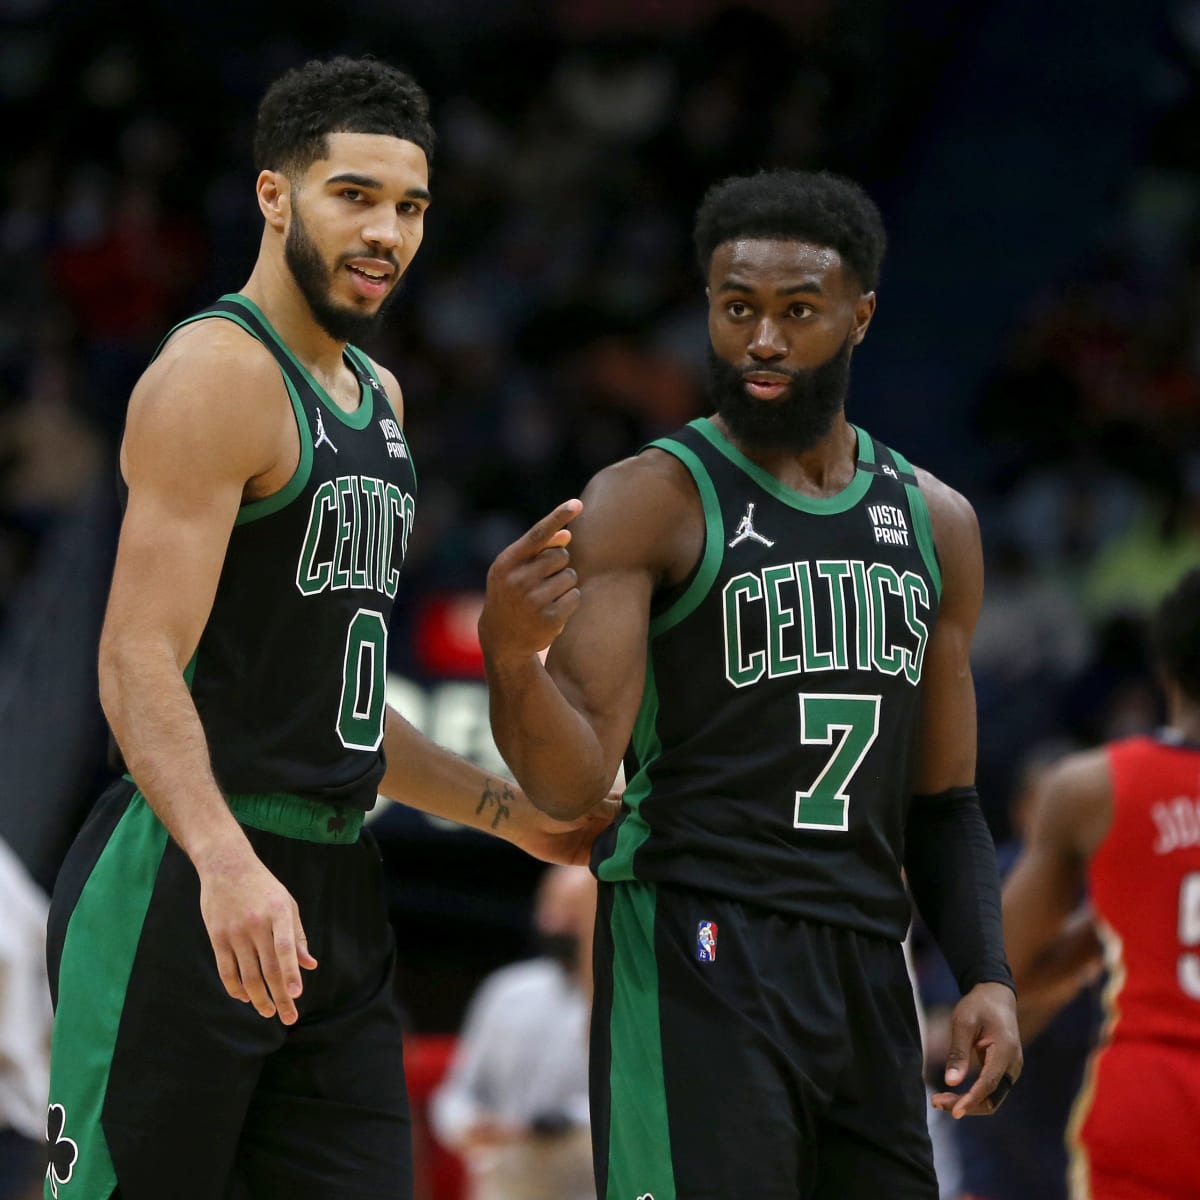 Tatum reveals what he said to Jaylen Brown about Durant trade rumors